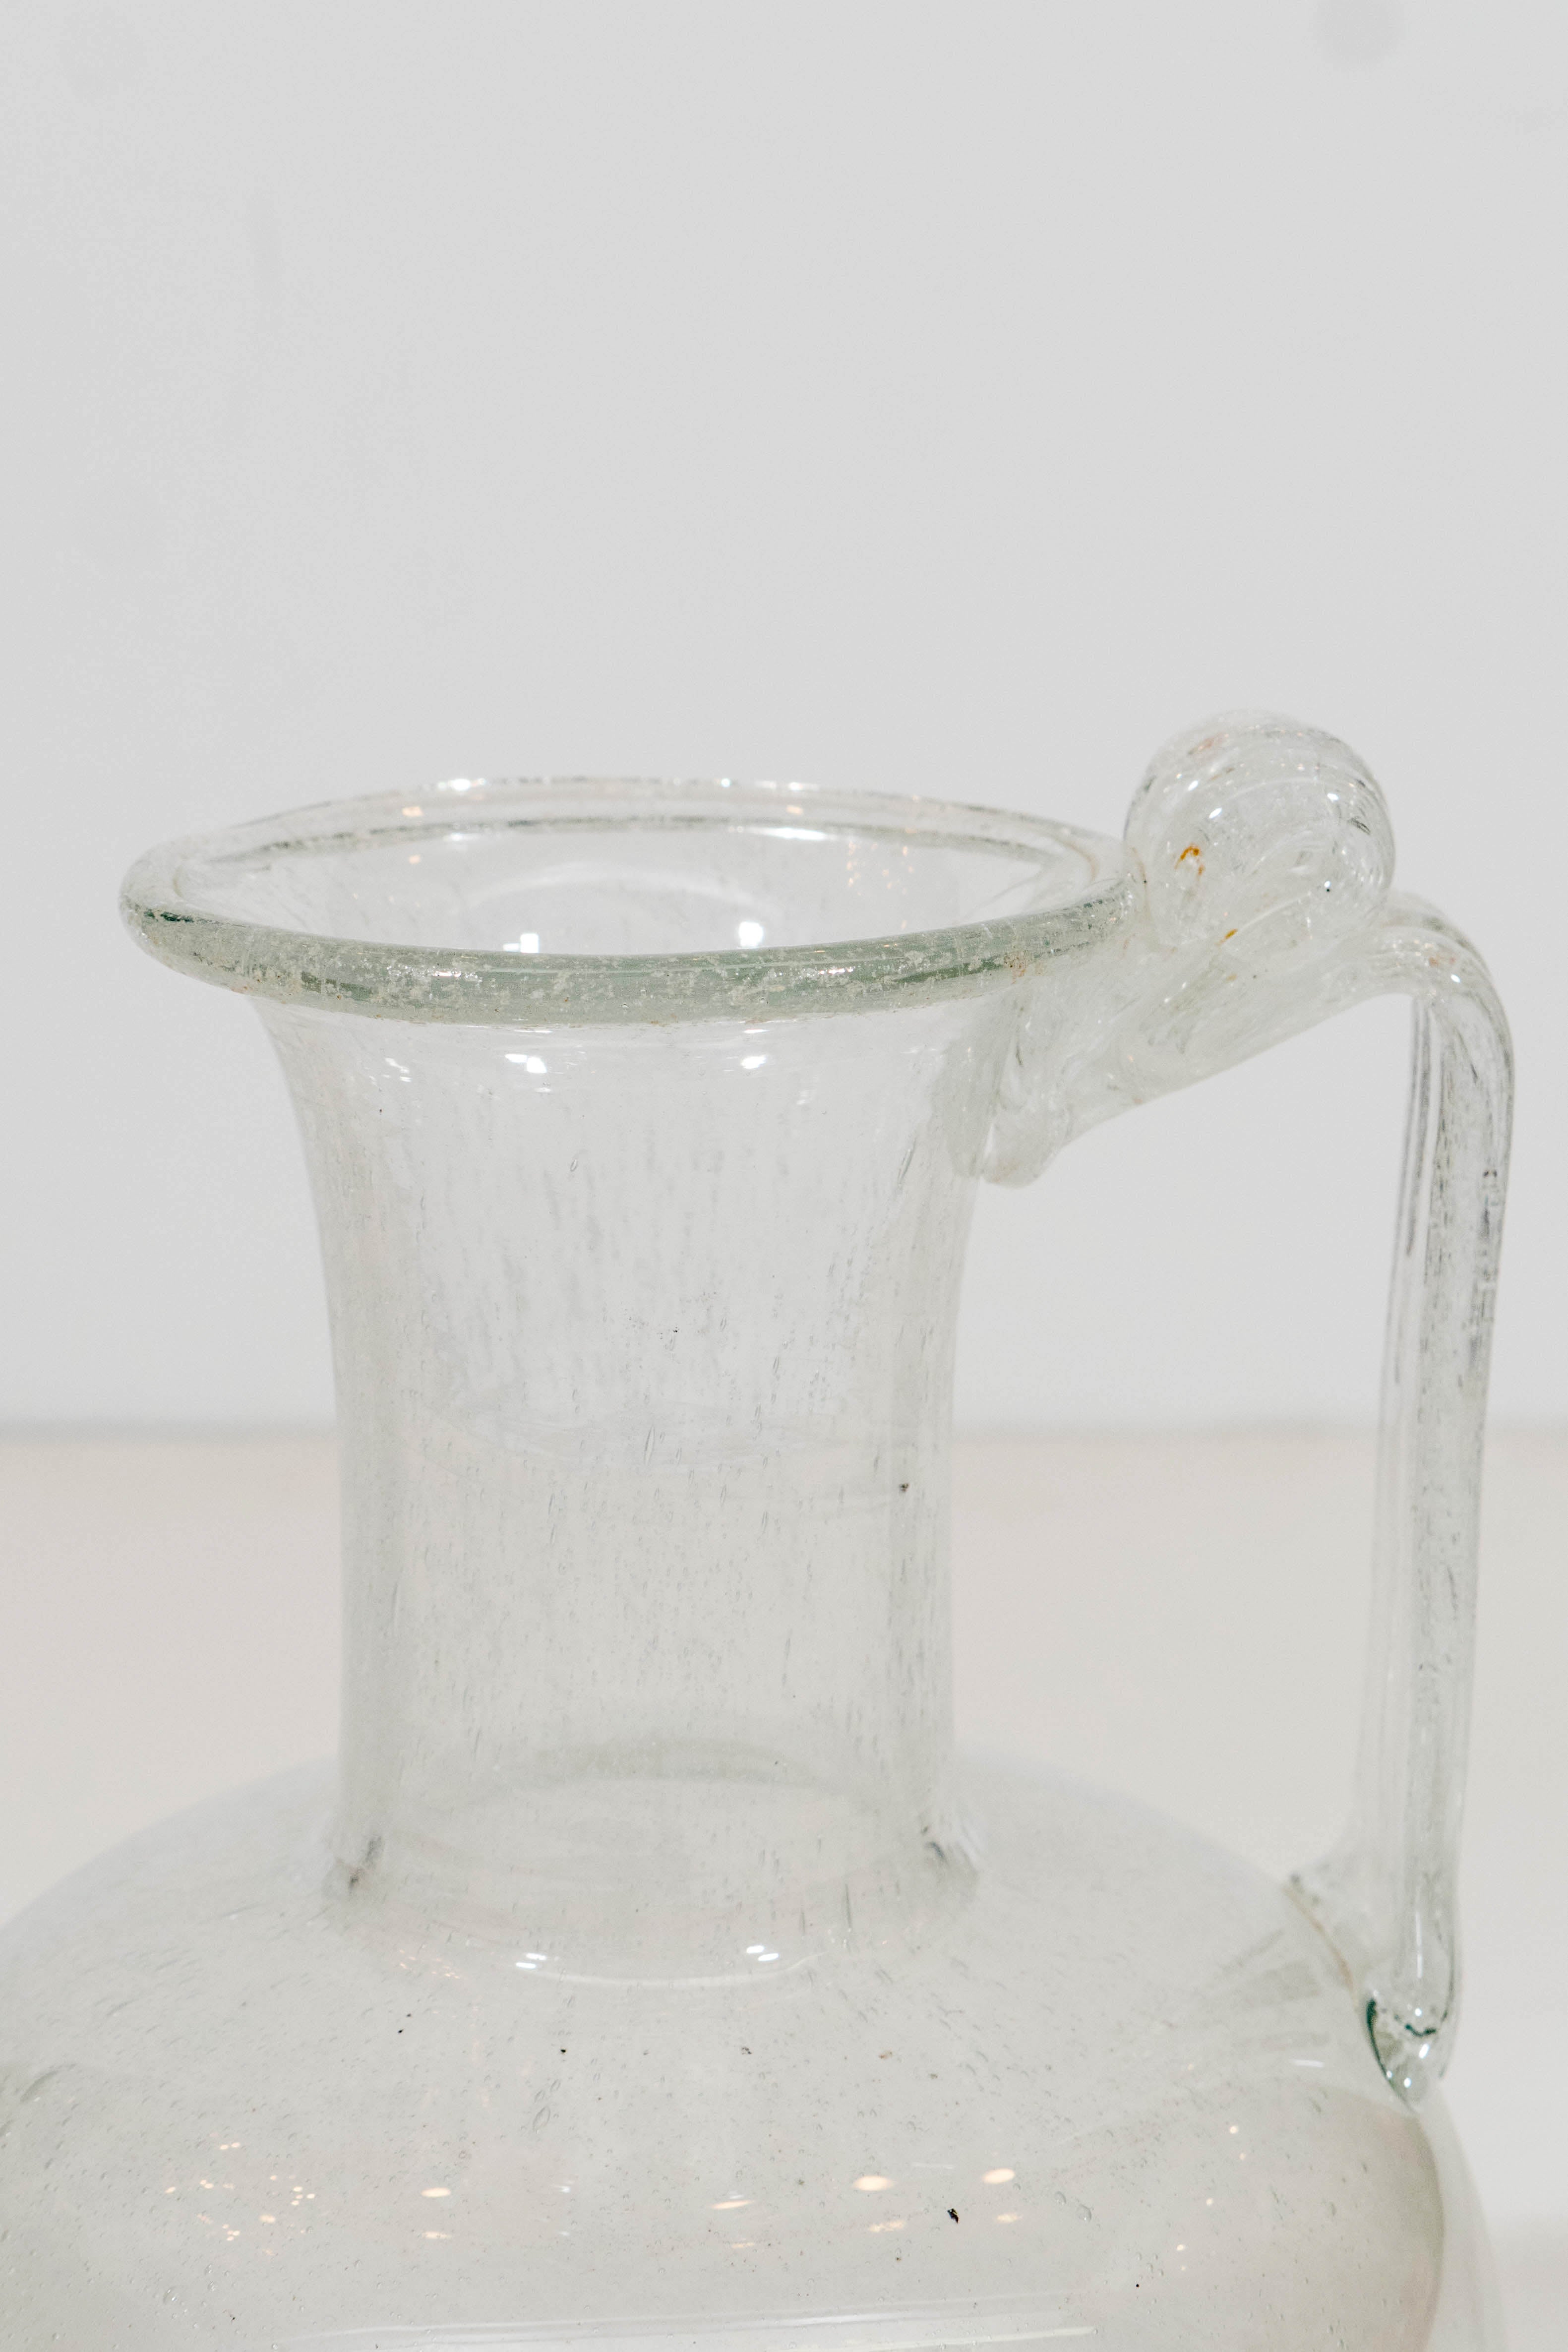 A vintage Venetian glass ewer or pitcher, features clear glass body with infused bubbles, and a handle that is finished with a decorative fold-over at the funnel mouth. Good vintage condition, with crackalure over the neck and handle.